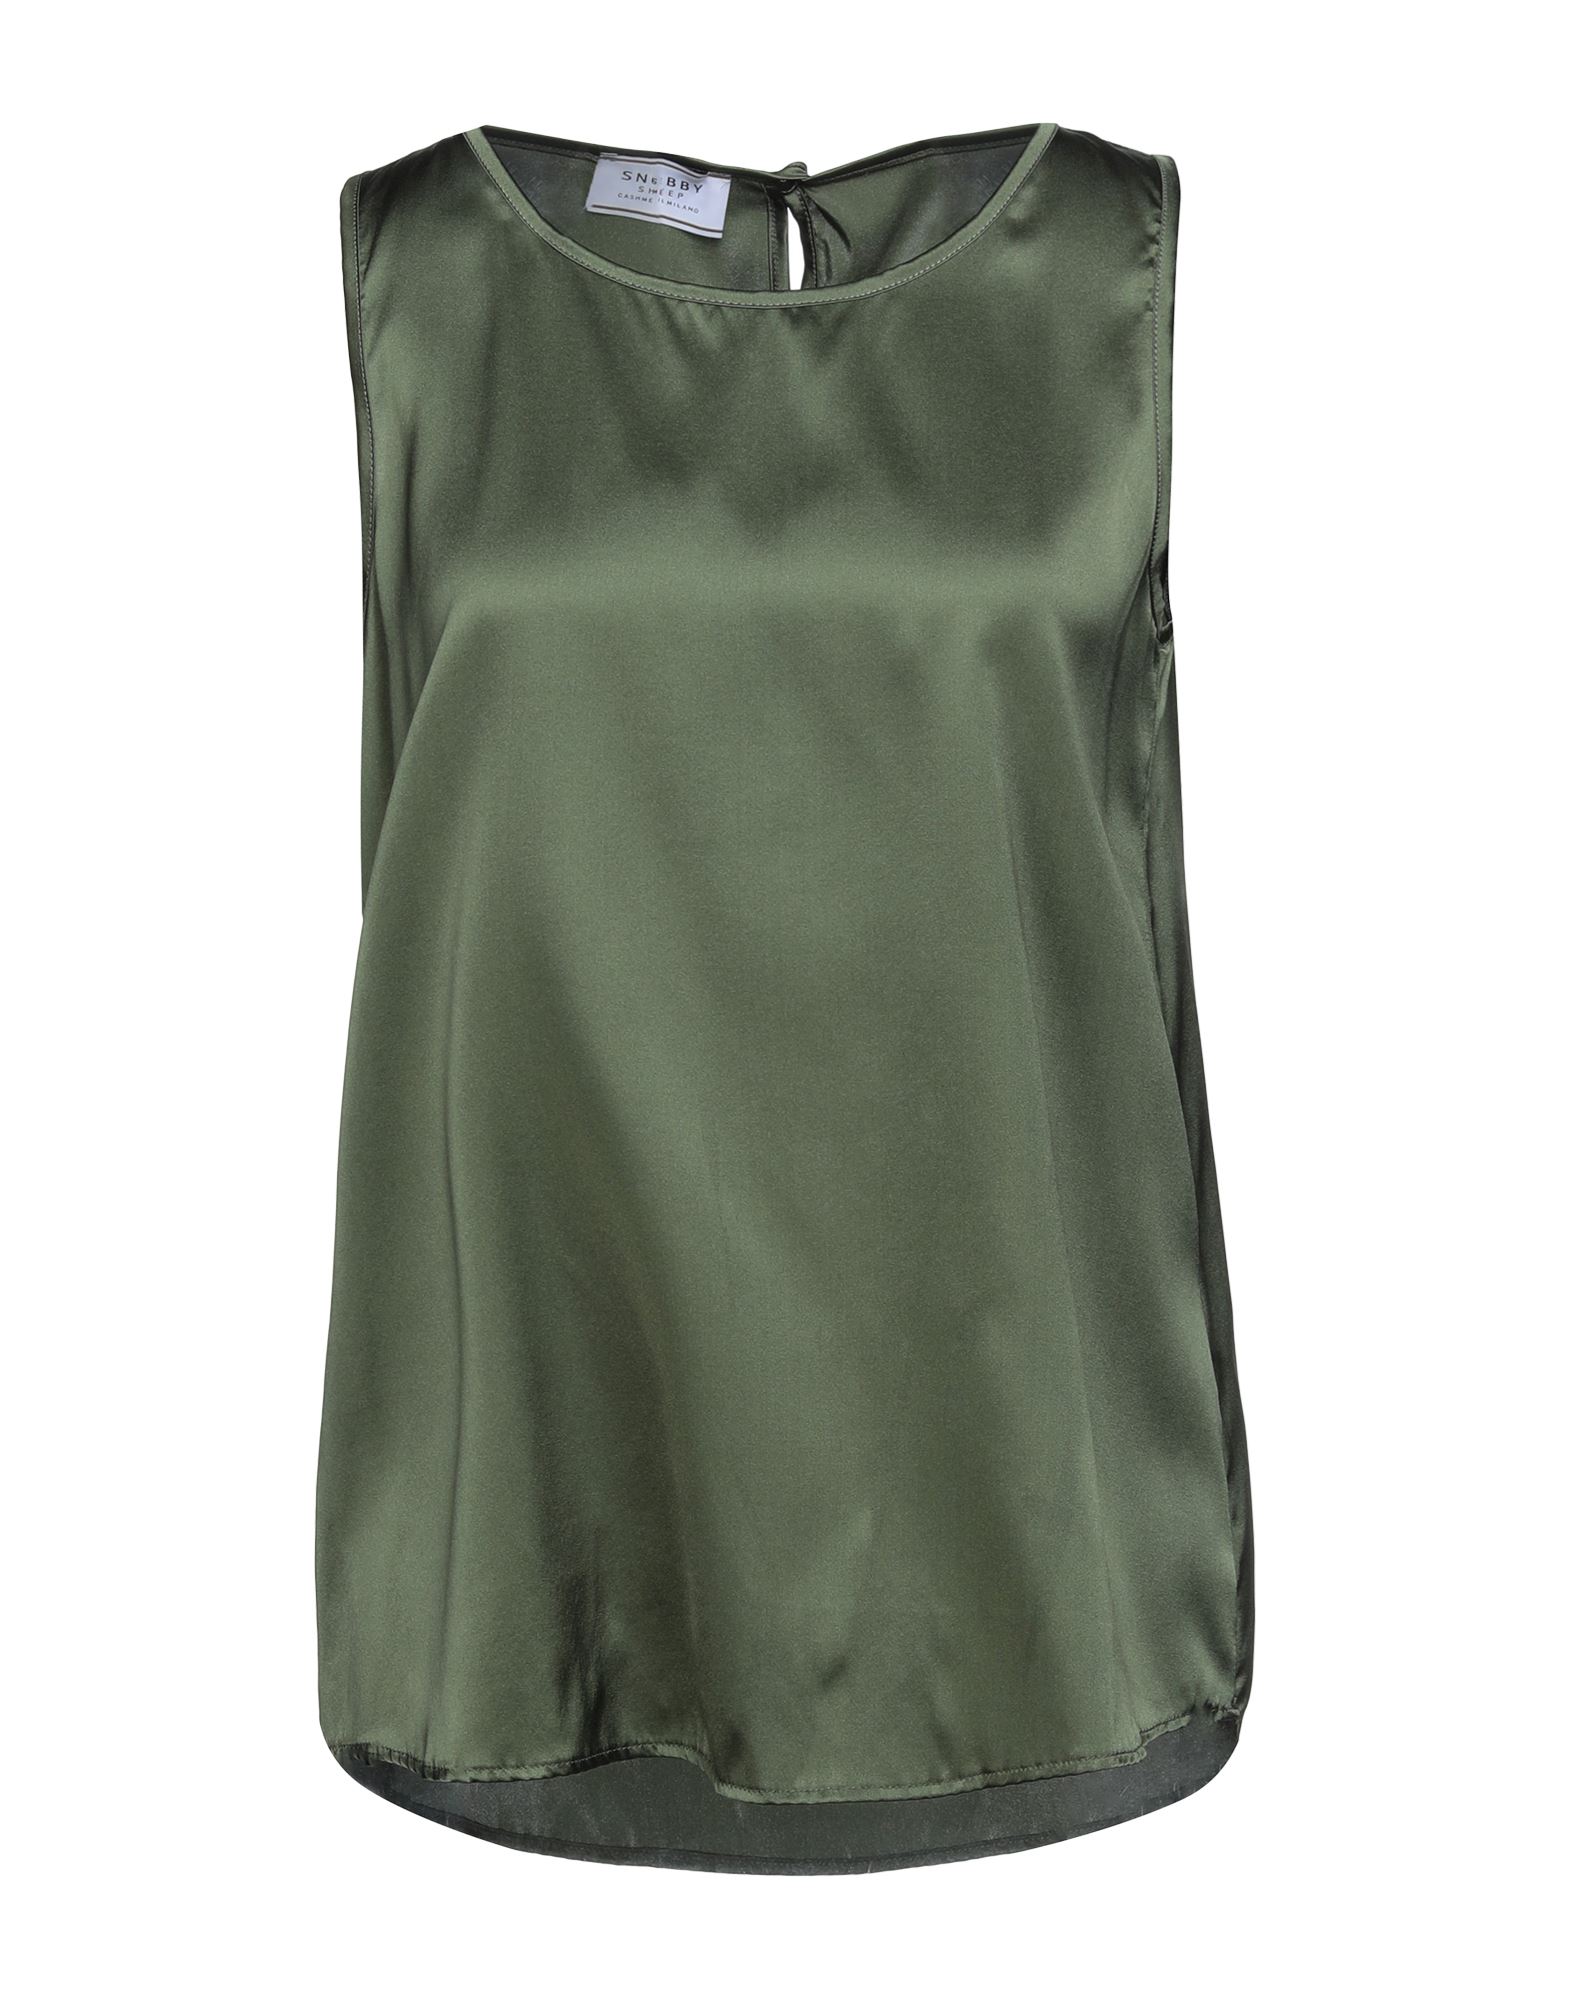 Snobby Sheep Tops In Military Green